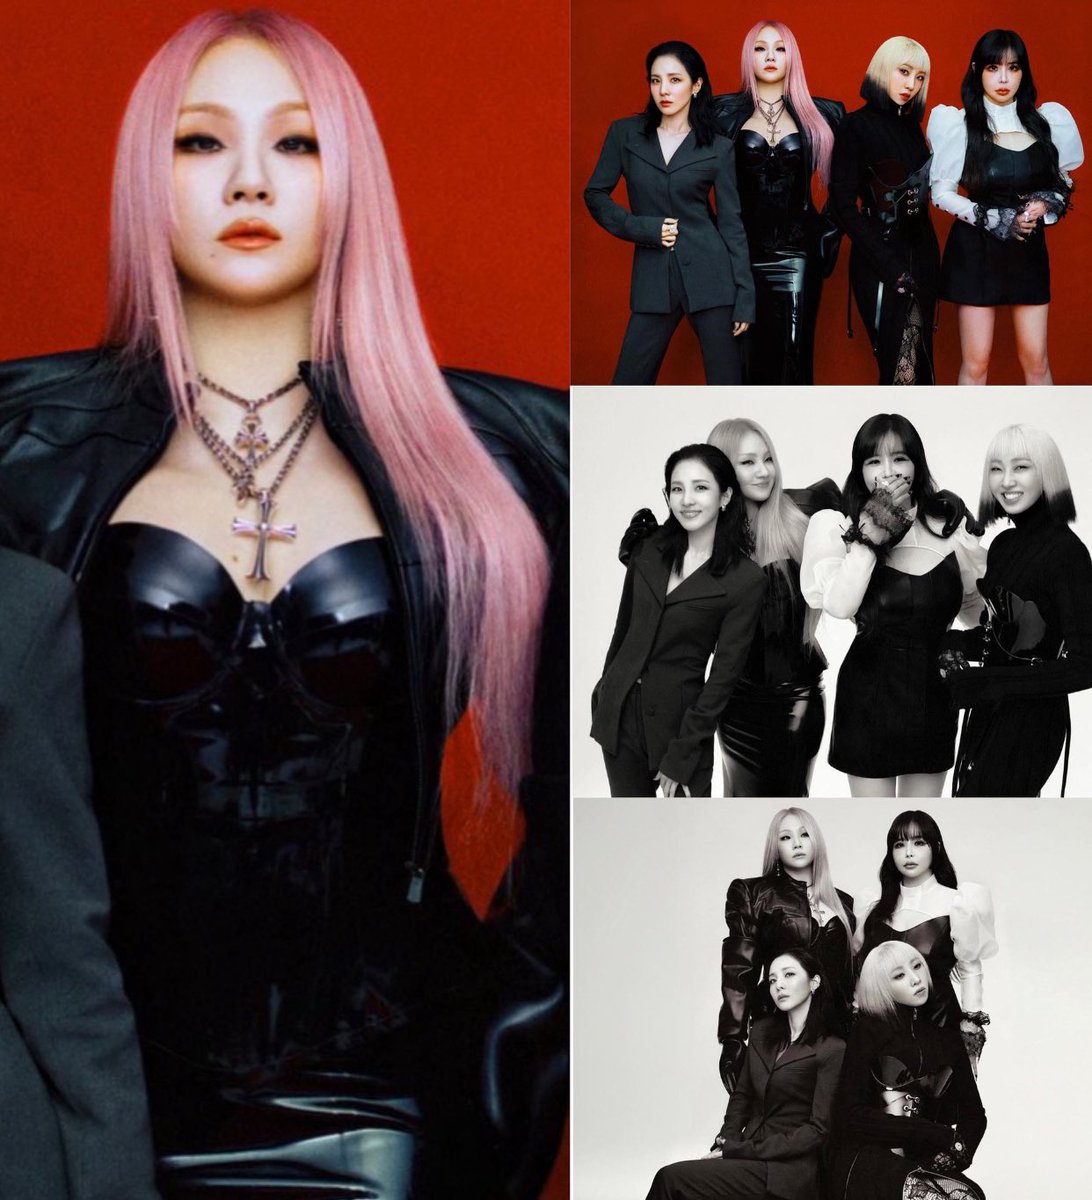 [NAVER ARTICLE] #CL Reveals Complete Photo of 2NE1's 15th Anniversary... 'Beautiful Day'

CL has been working hard not only by airlifting costumes directly from overseas for the 15th anniversary photoshoot but also by recruiting Cho Giseok who worked with her single “HWA” in